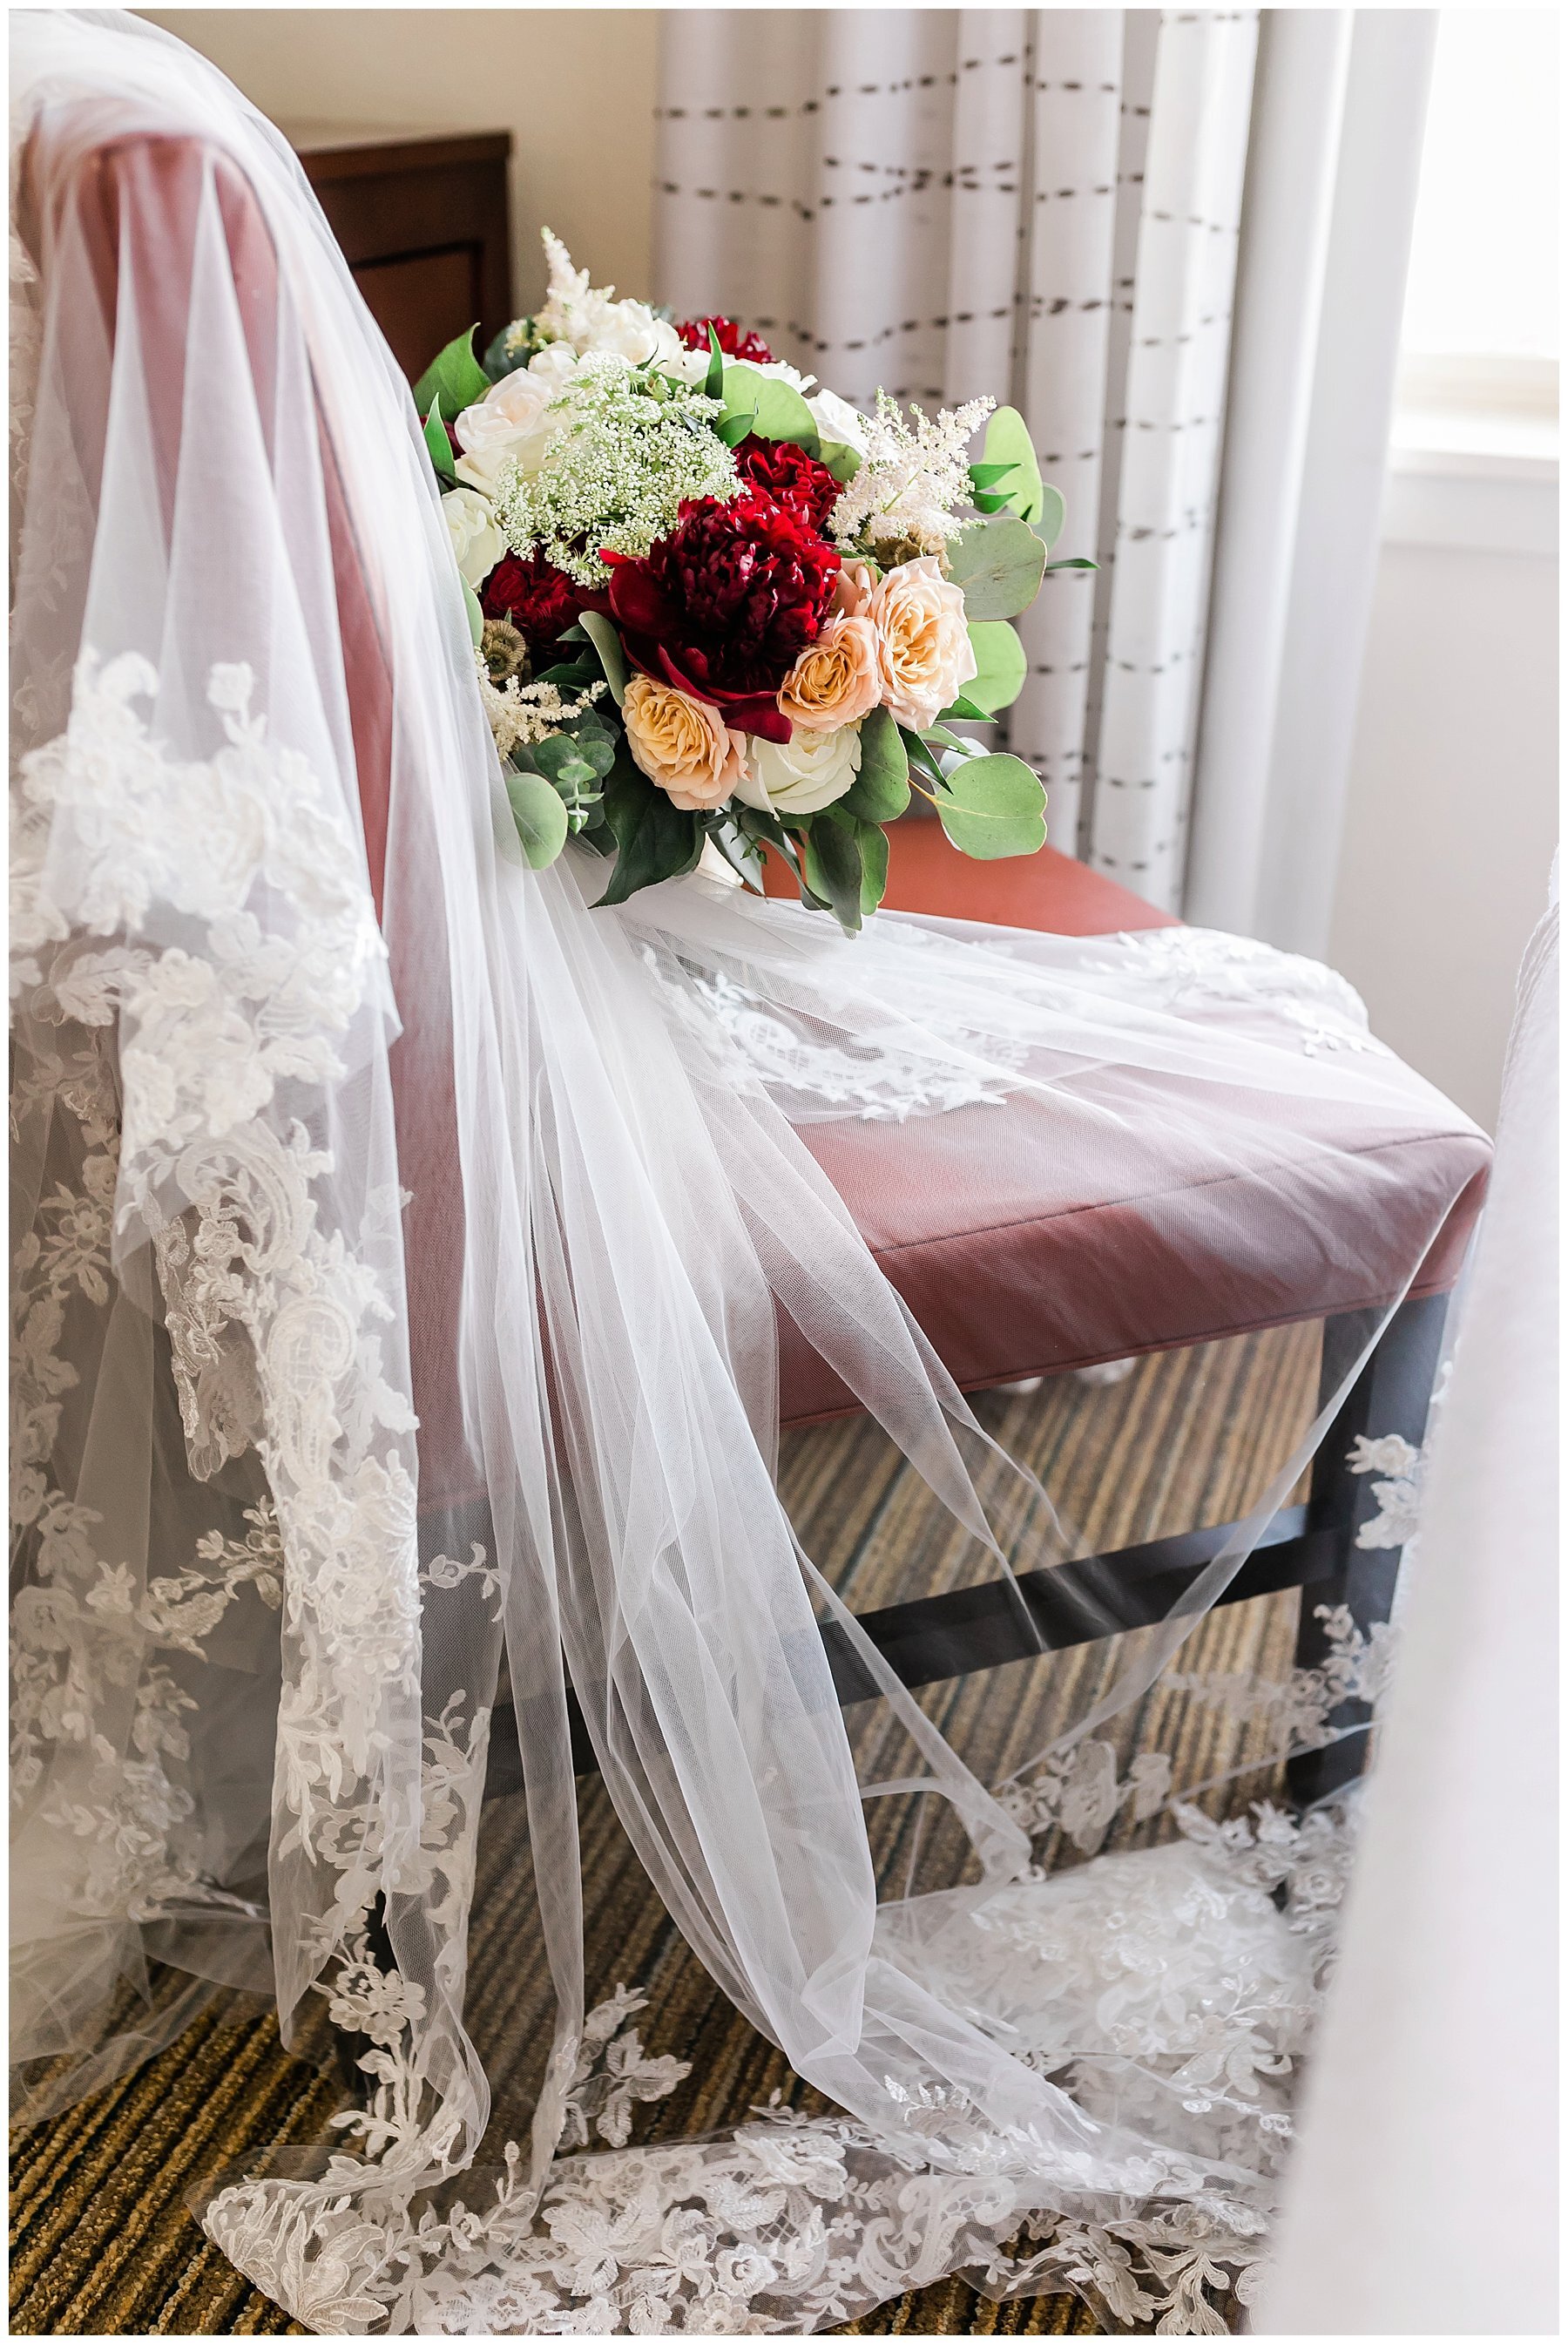  wedding veil and bouquet draped  